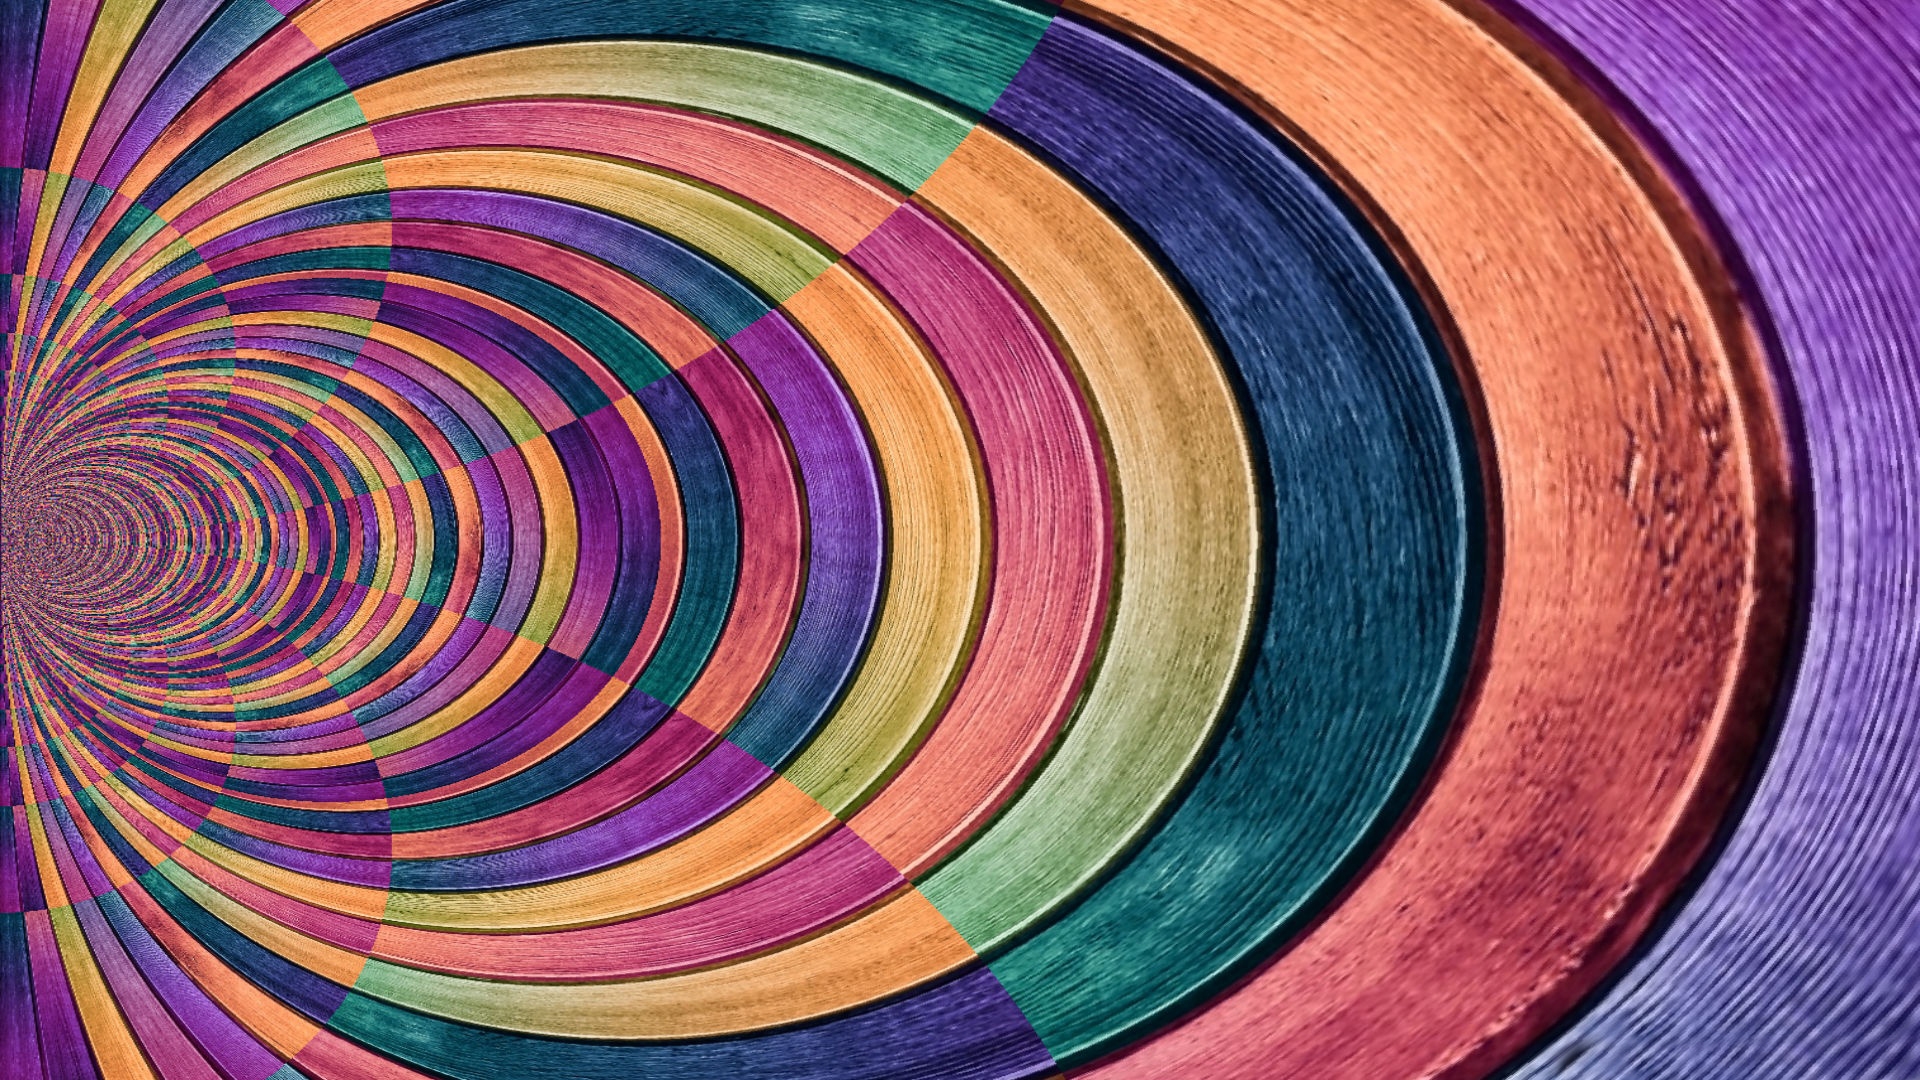 Colored round wooden Mac Wallpaper Download | Free Mac Wallpapers ...